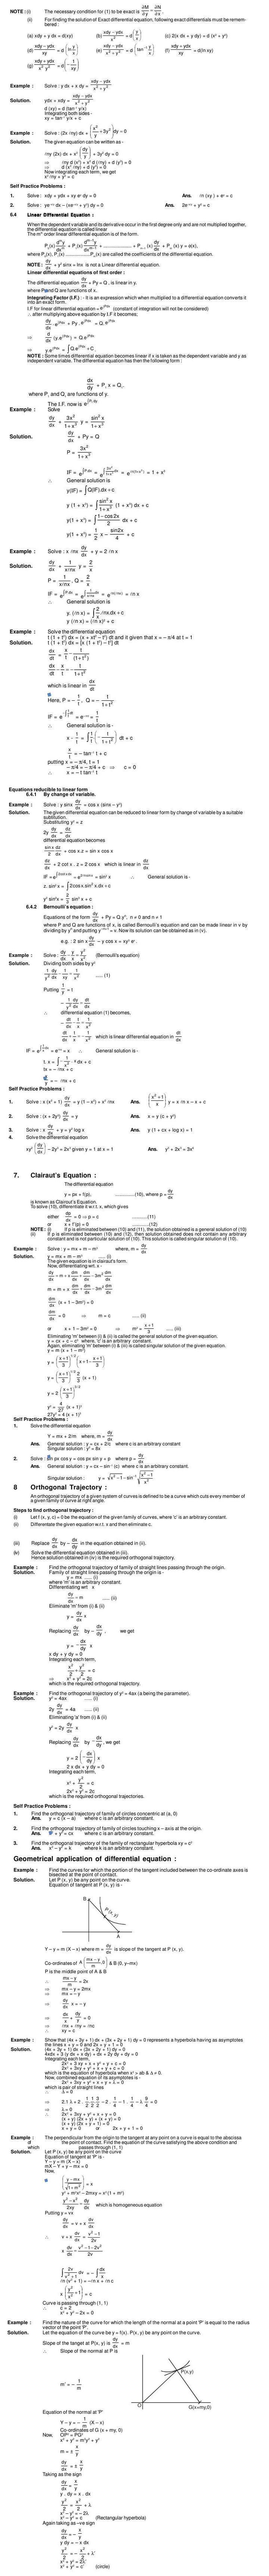 Maths Study Material - Chapter 16